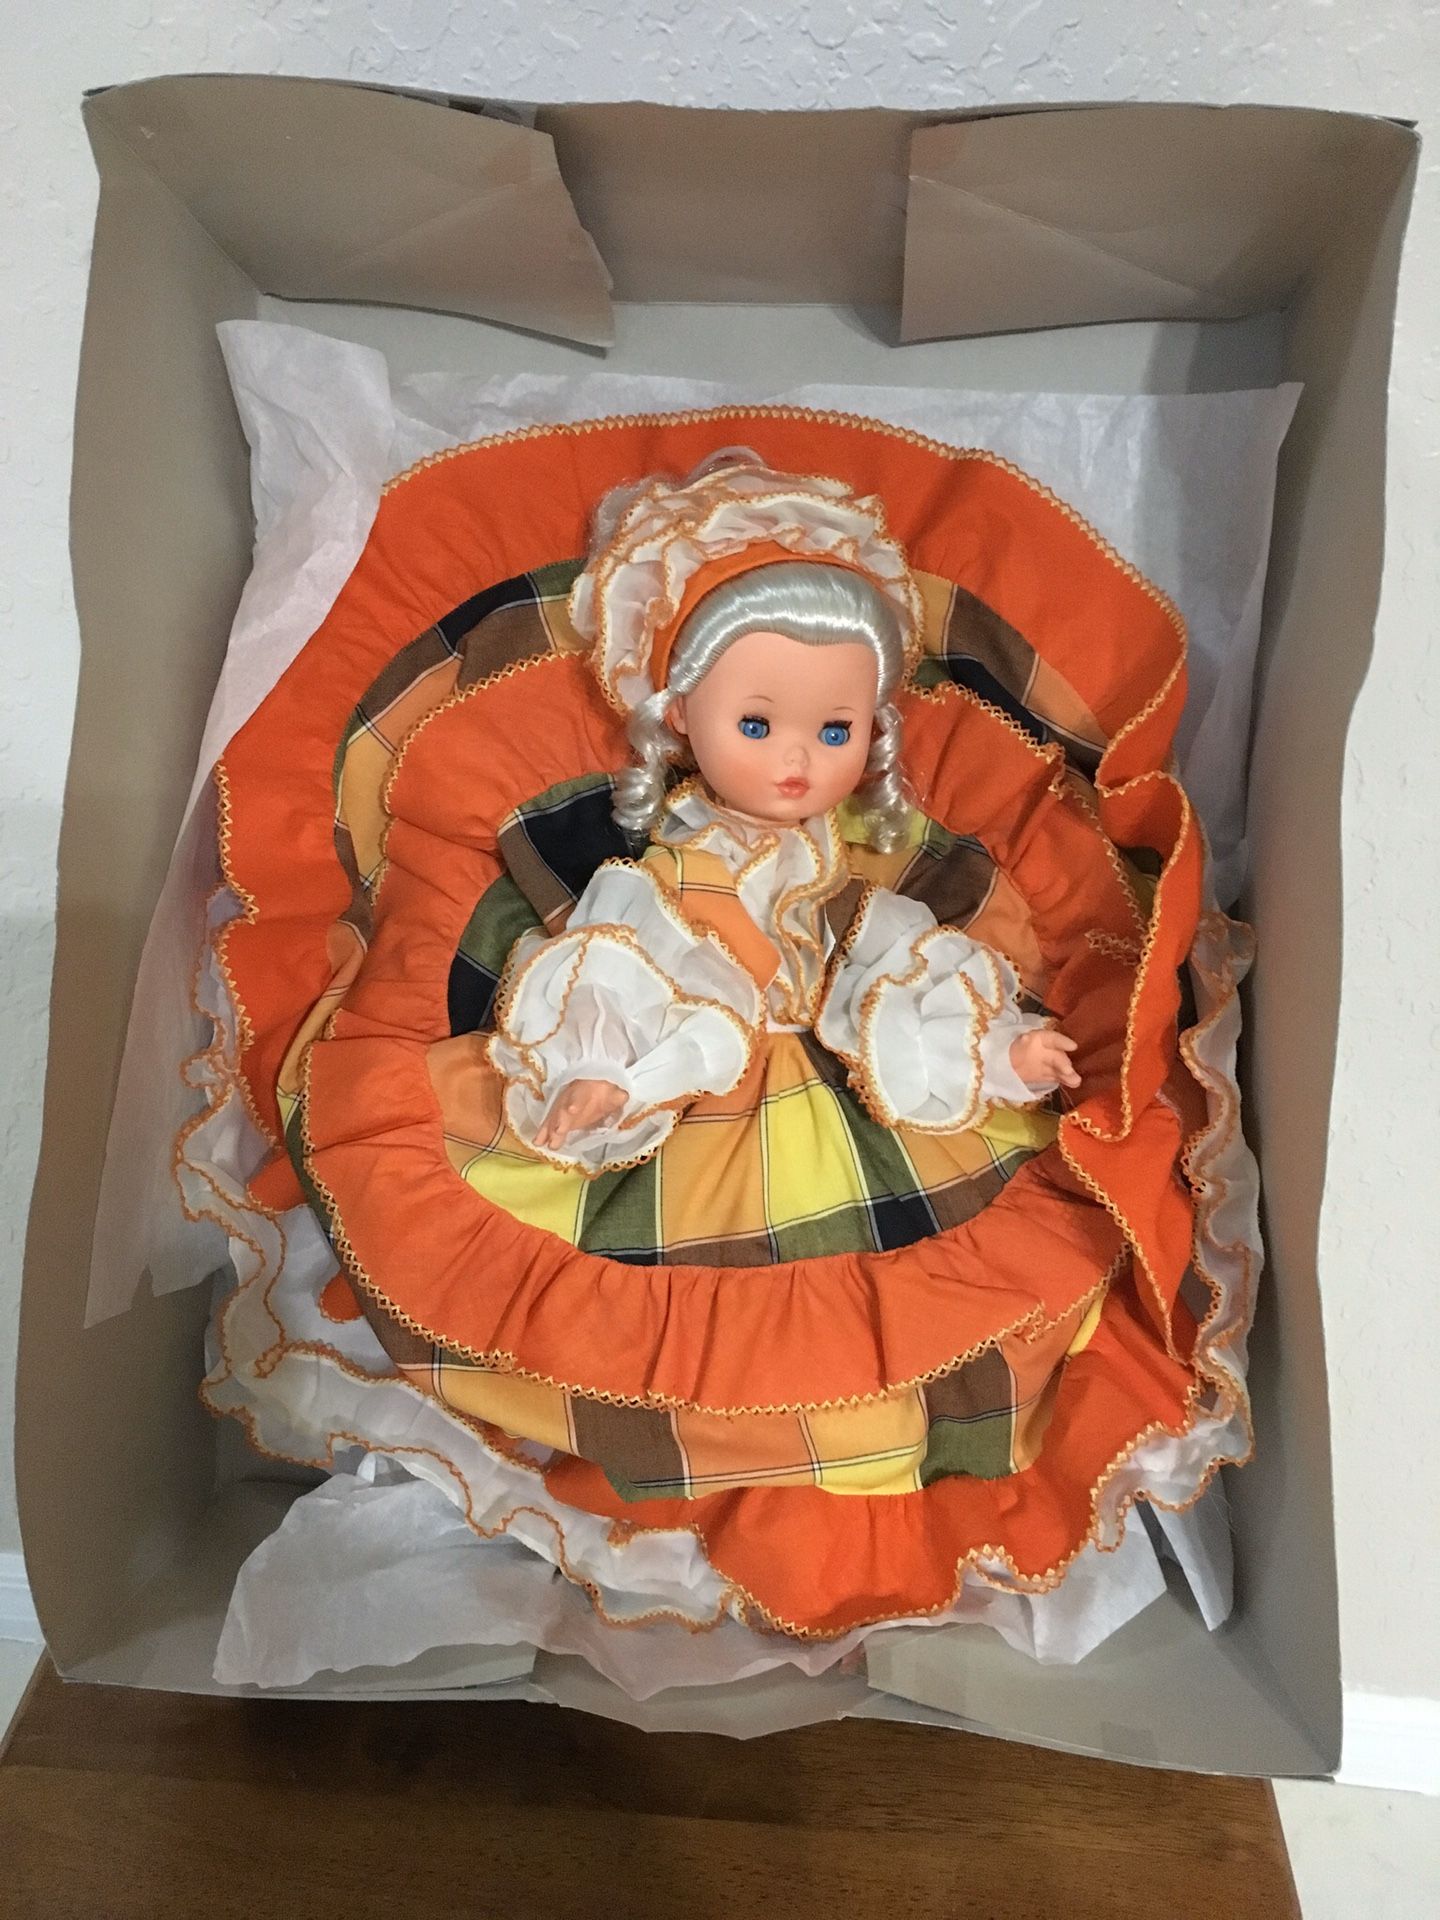 Vintage Italian doll “Furga brand”, from 1969. Not used, original orange outfit ($35.00)